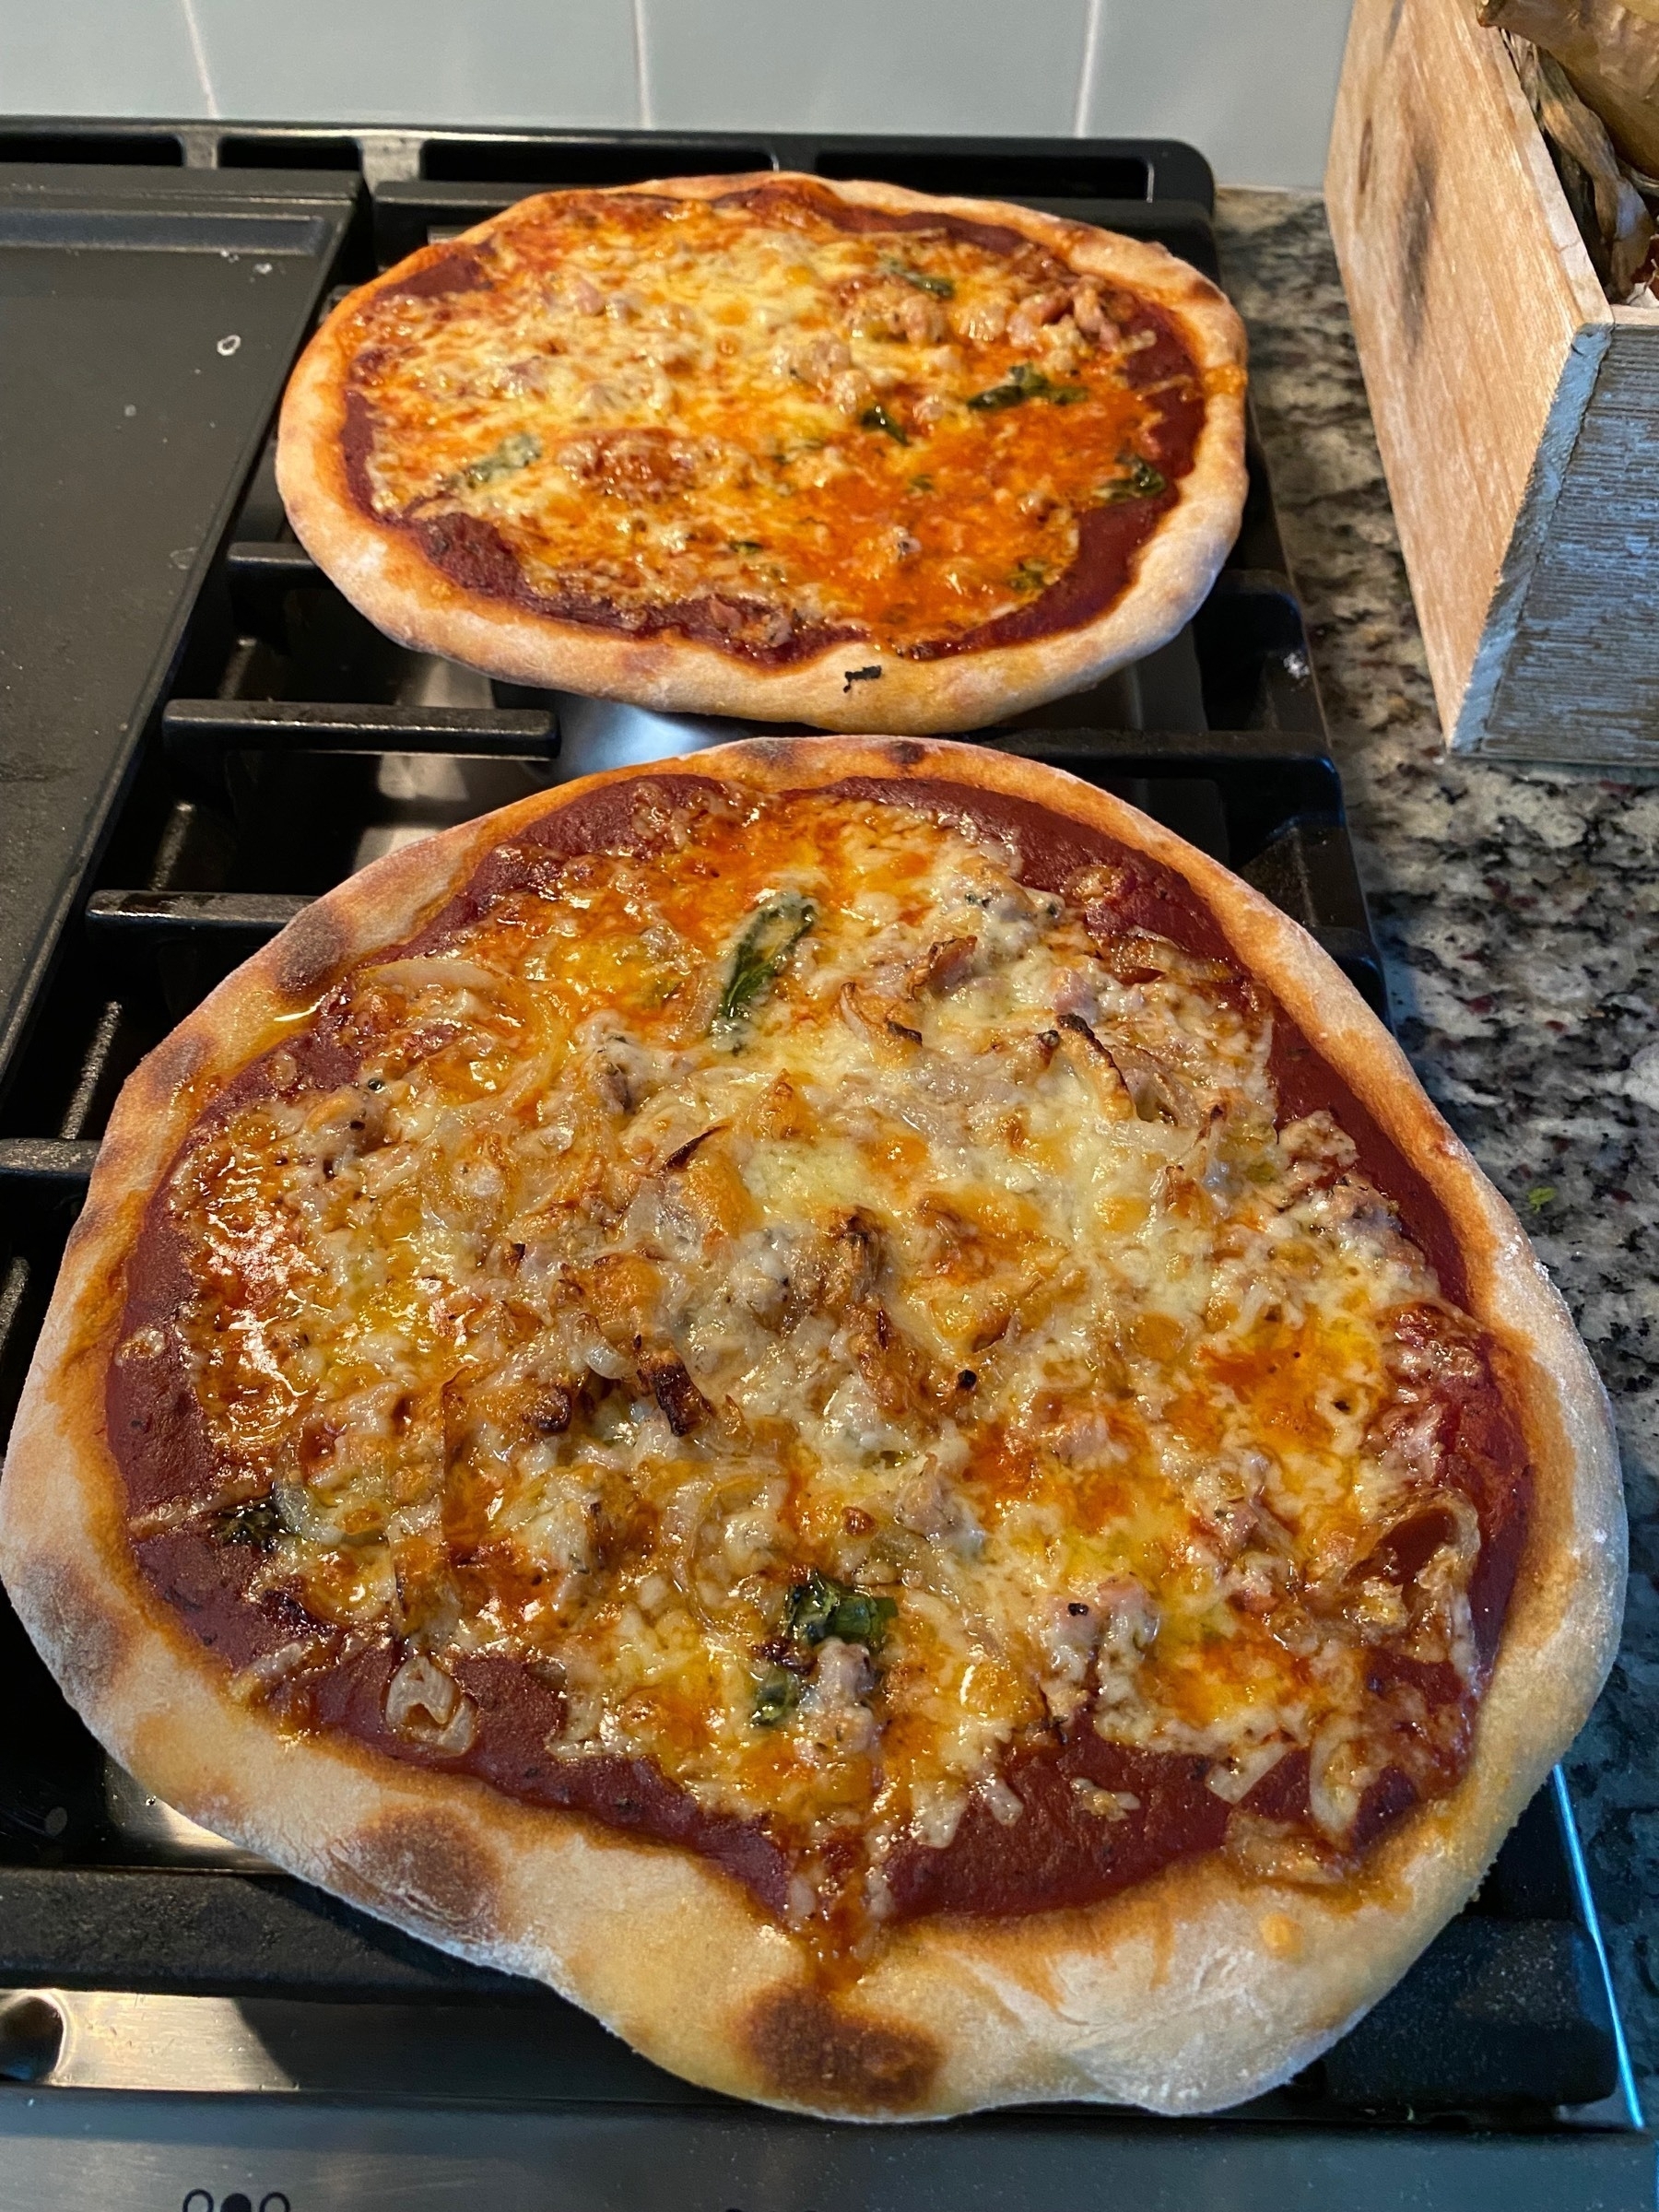 Two small pizzas on a stove top.